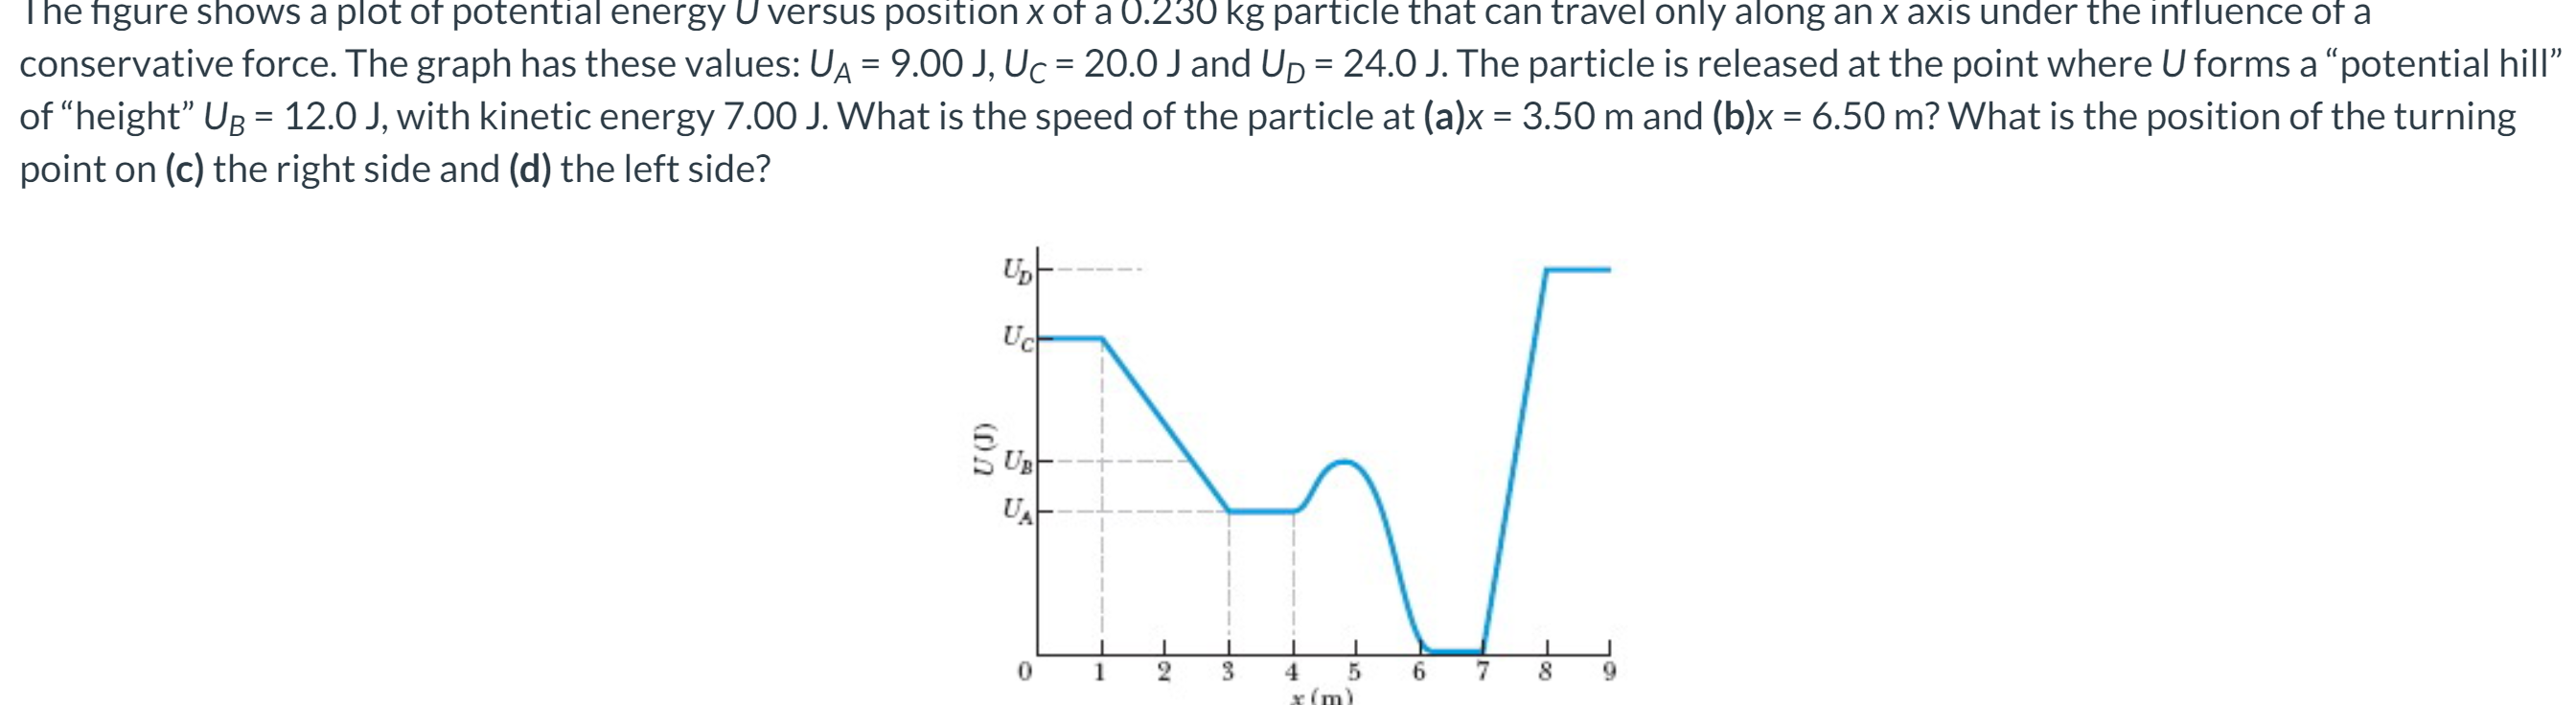 The figure shows a plot of potential energy U versus position x of a 0.230 kg particle that can travel only along an x axis under the influence of a conservative force. The graph has these values: UA = 9.00 J, UC = 20.0 J and UD = 24.0 J. The particle is released at the point where U forms a "potential hill" of "height" UB = 12.0 J, with kinetic energy 7.00 J. What is the speed of the particle at (a)x = 3.50 m and (b)x = 6.50 m ? What is the position of the turning point on (c) the right side and (d) the left side?